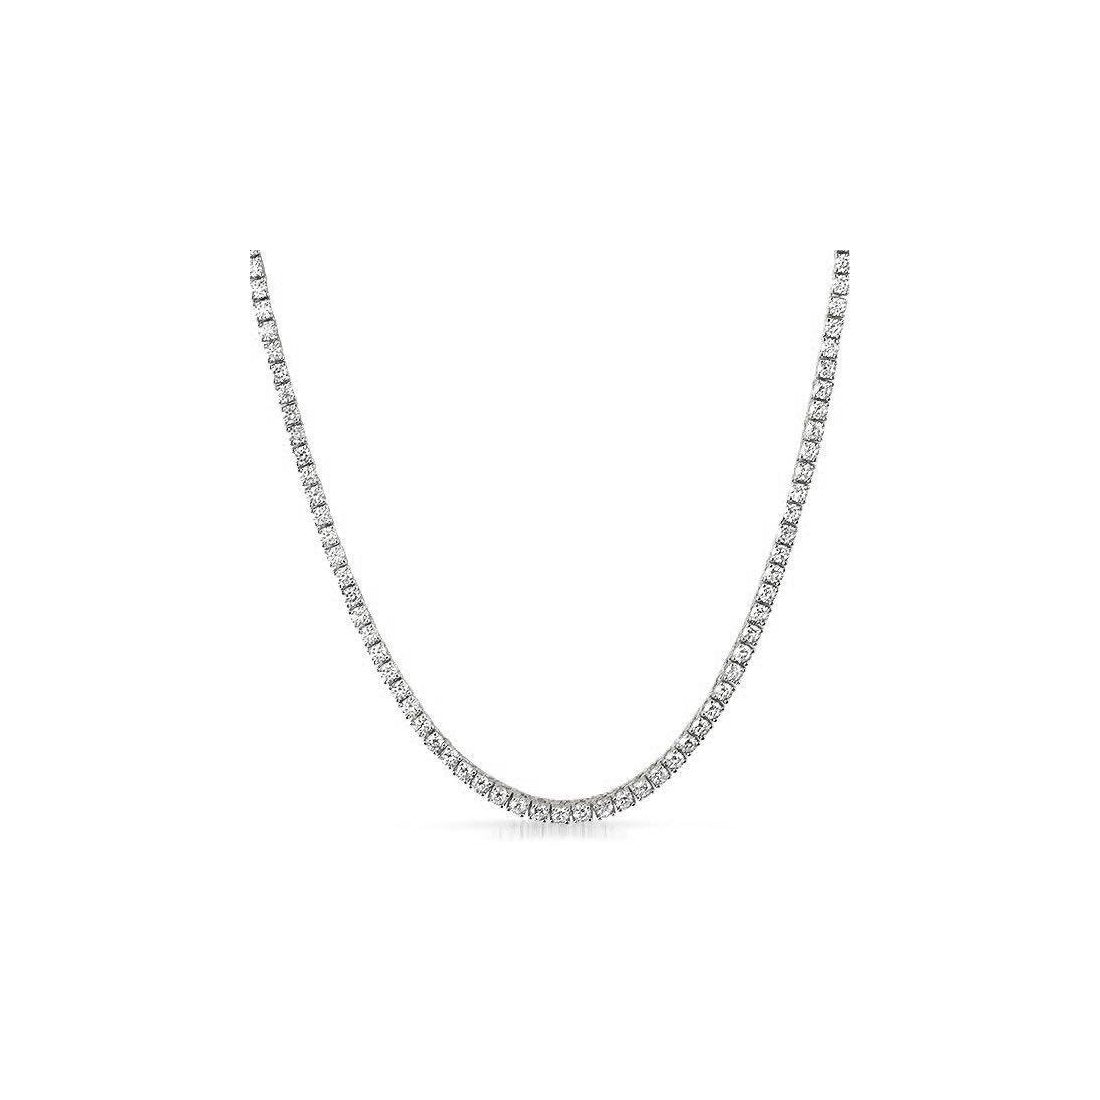 2MM CZ Tennis Necklaces .925 Sterling Silver Length "17" Inches